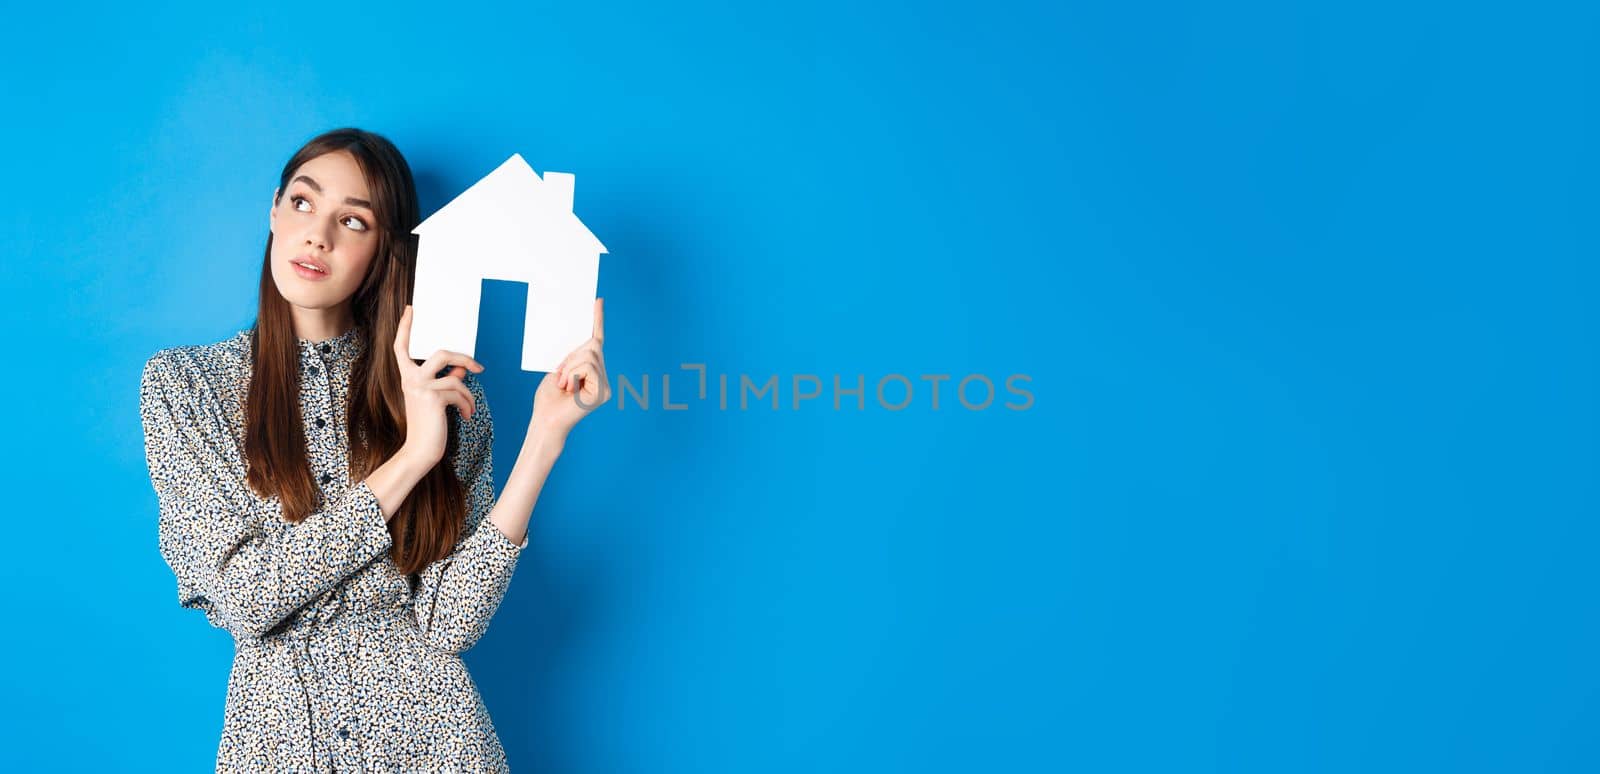 Real estate, realtors and insurance concept. Dreamy beautiful adult woman thinking of own house, showing paper home cutout and look aside at logo, standing against blue background.